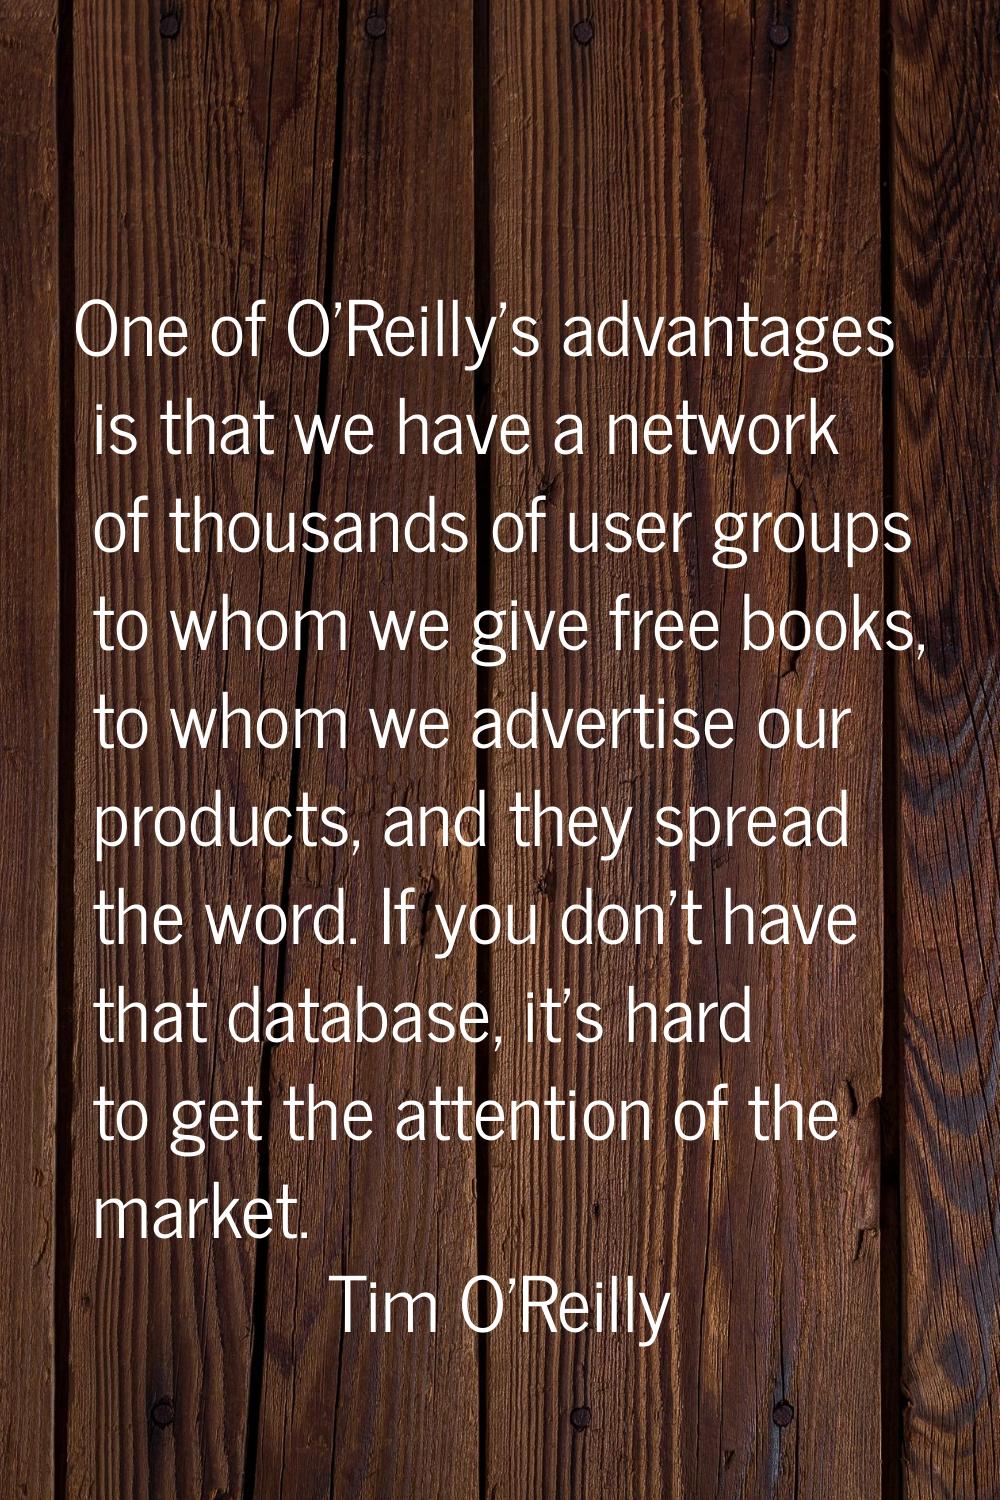 One of O'Reilly's advantages is that we have a network of thousands of user groups to whom we give 